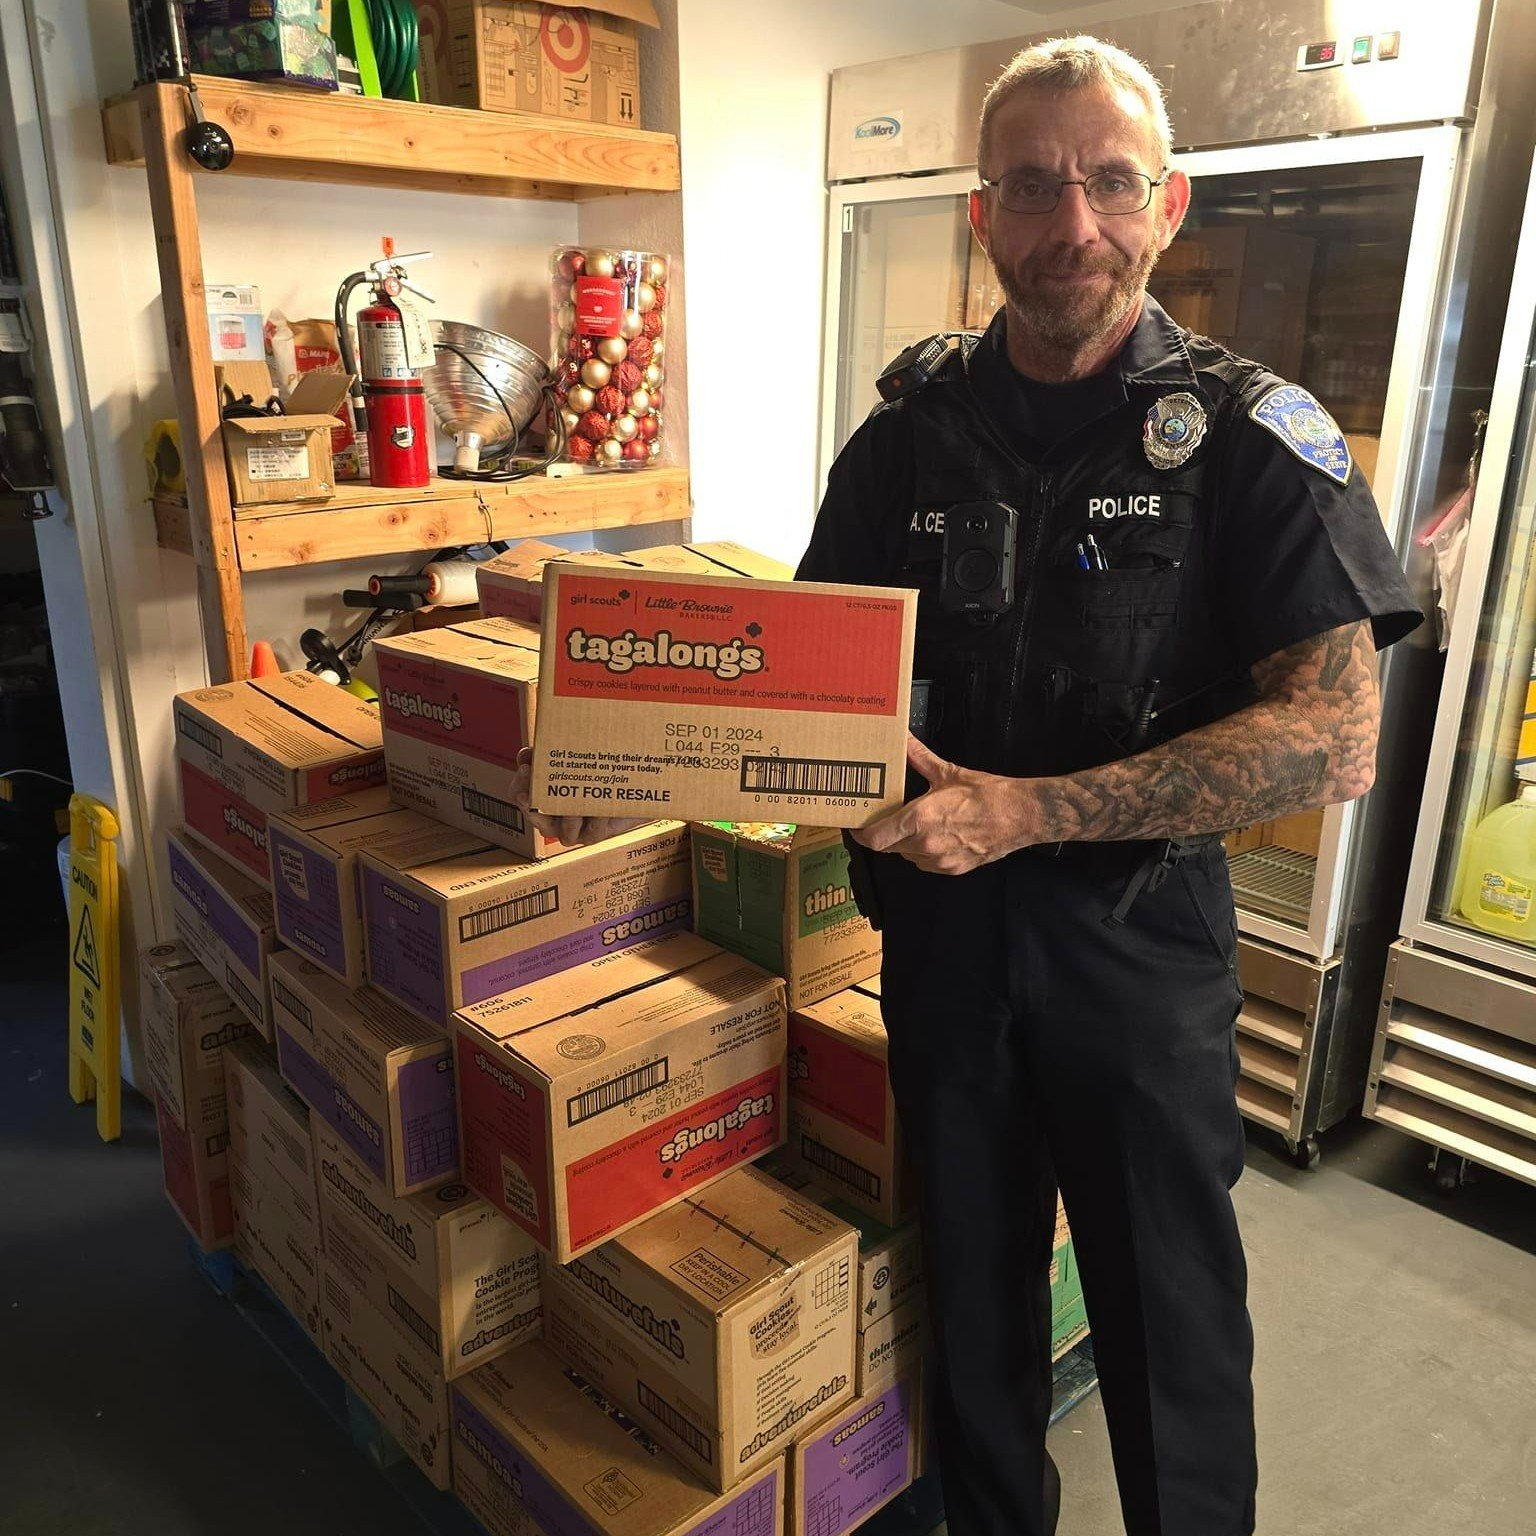 BPD recently received a large delivery of donated Girl Scout cookies to pass along to our community partners. Officer Cerniglia dropped off several cases of cookies at the Hungers End - Manatee for food pantry patrons to enjoy. 🍪🚔